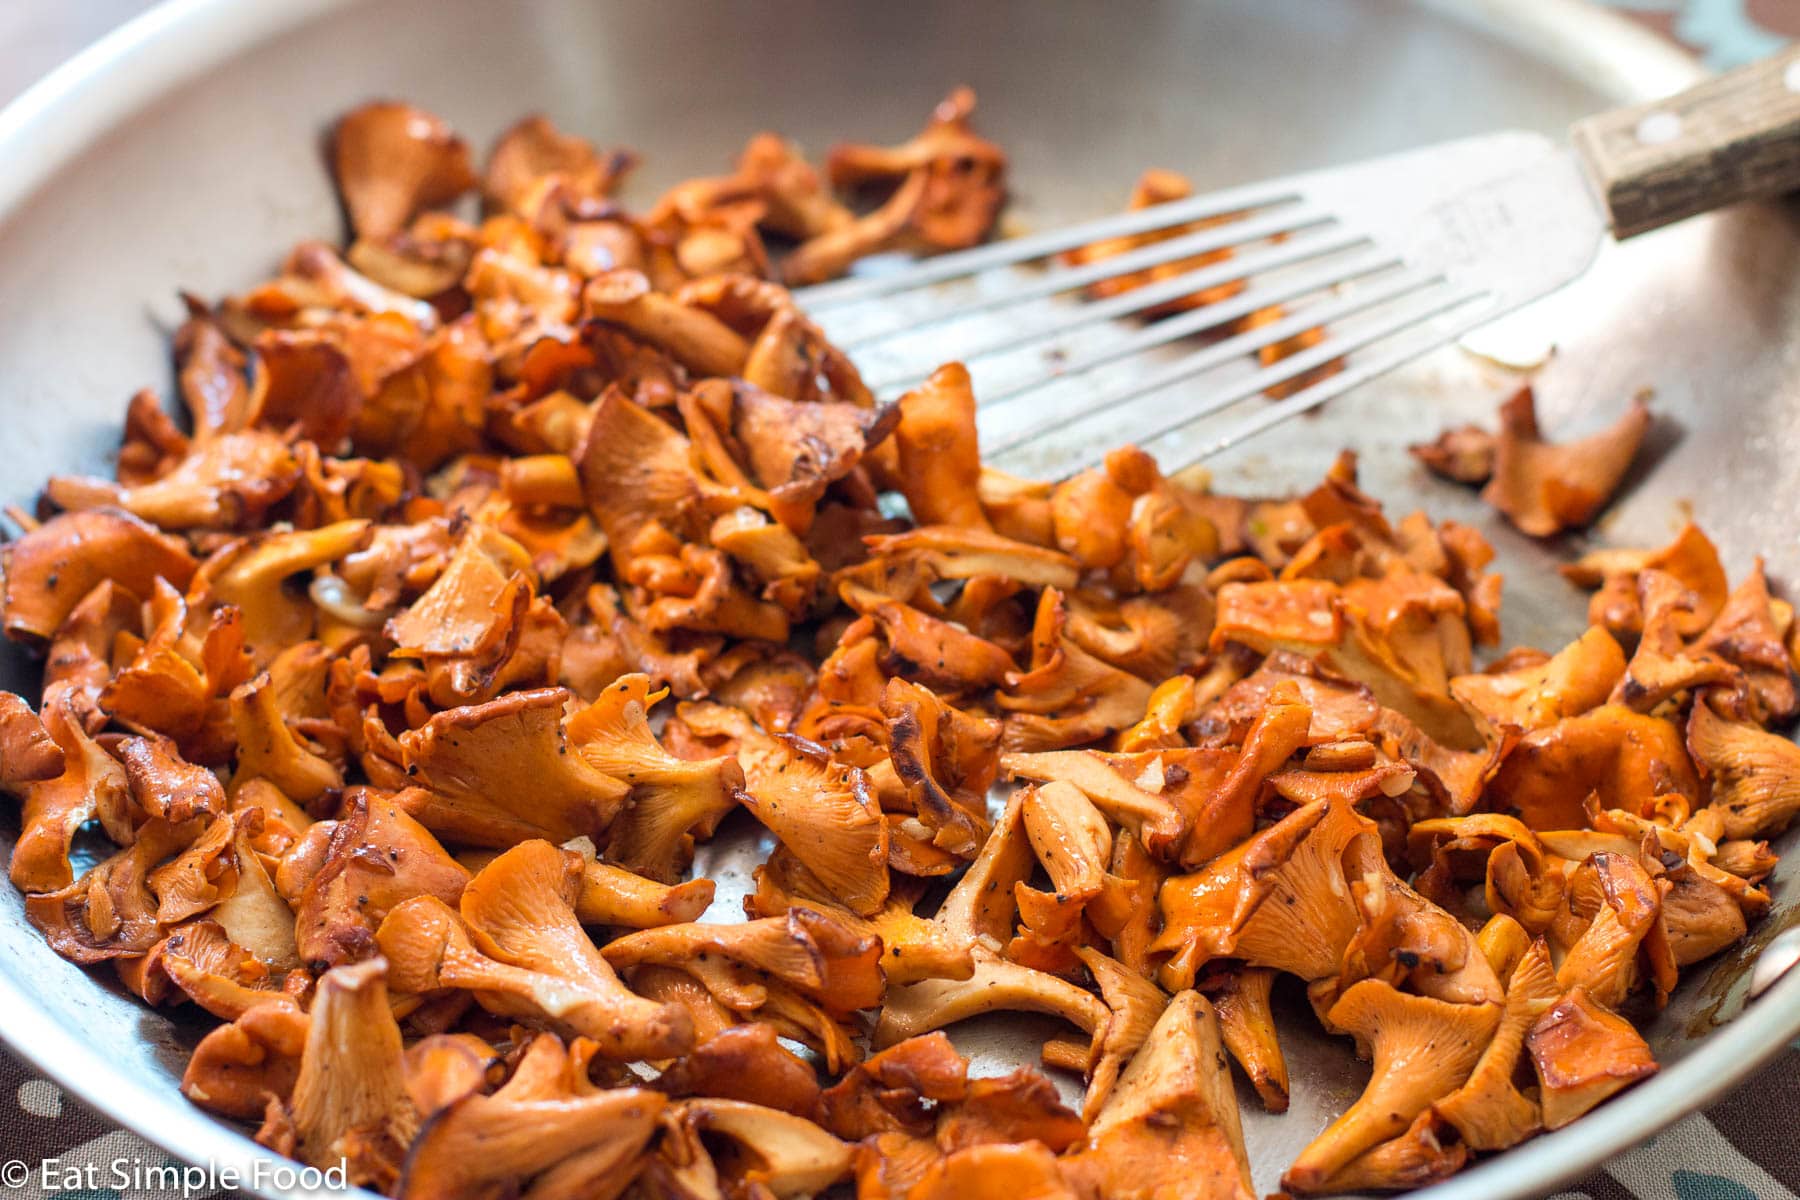 Cooked quartered orange brown chanterelle mushrooms in a stainless steel pan with a fish spatula.